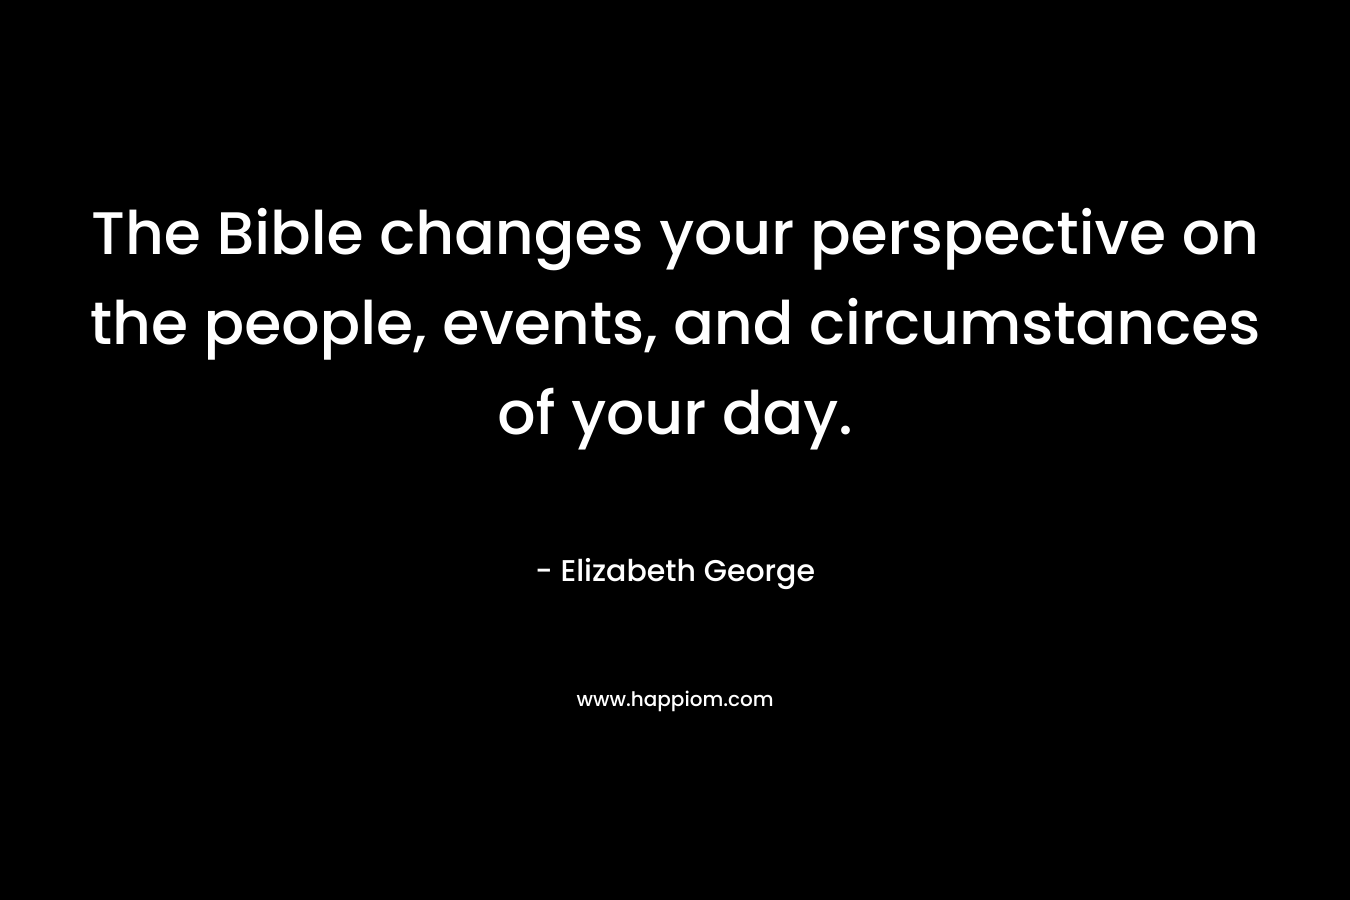 The Bible changes your perspective on the people, events, and circumstances of your day.